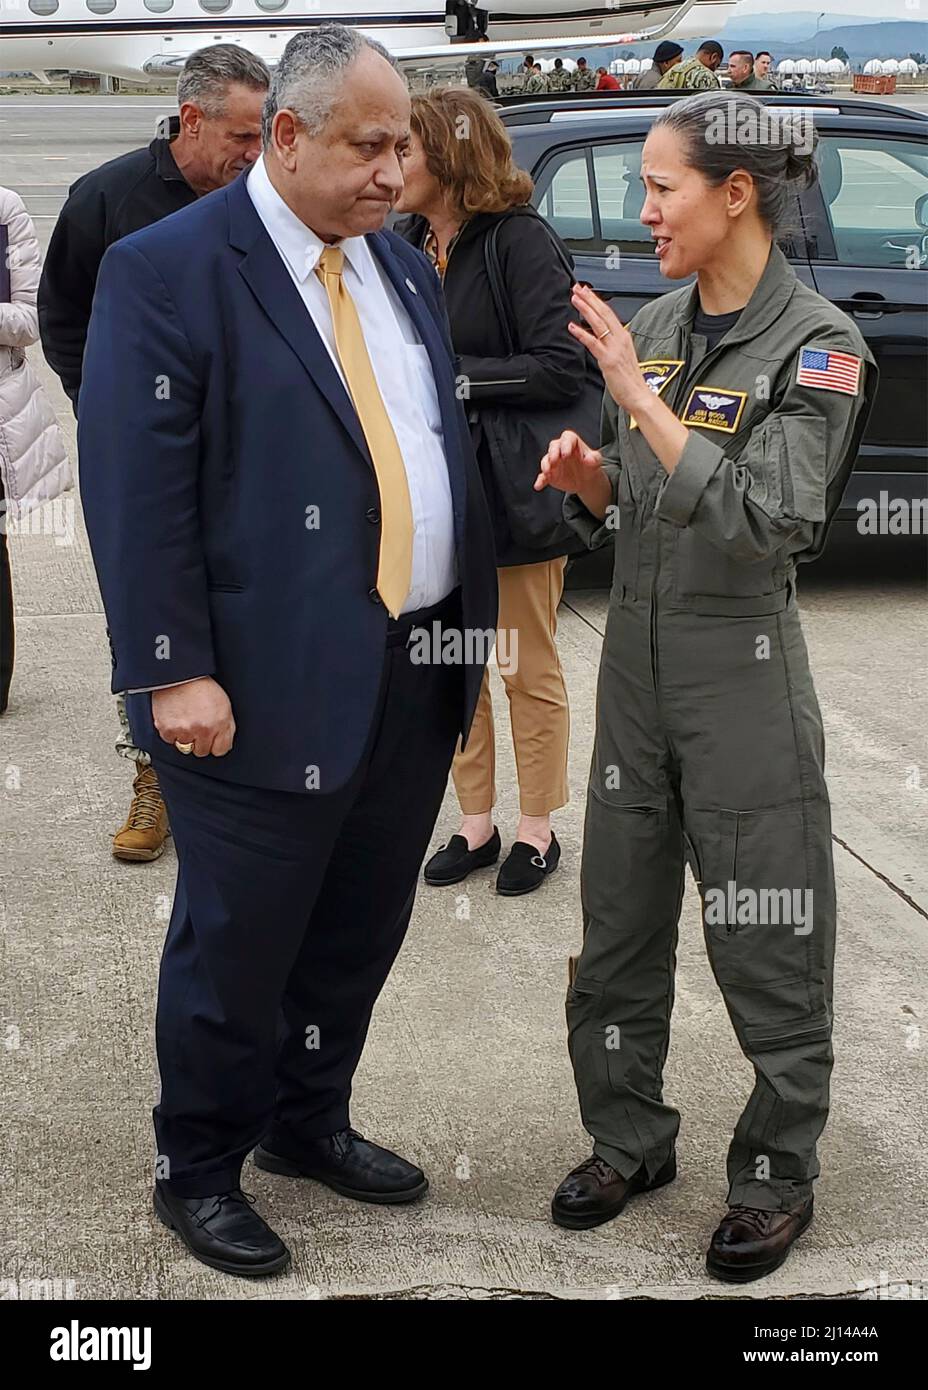 Sigonella, Italy. 21 March, 2022. U.S. Secretary of the Navy Carlos Del Toro, left, speaks with Command Master Chief Anna Wood, on arrival to NAS Sigonella, March 21, 2022 in the Sigonella, Italy.  Credit: MC1 Kegan Kay/US Navy/Alamy Live News Stock Photo